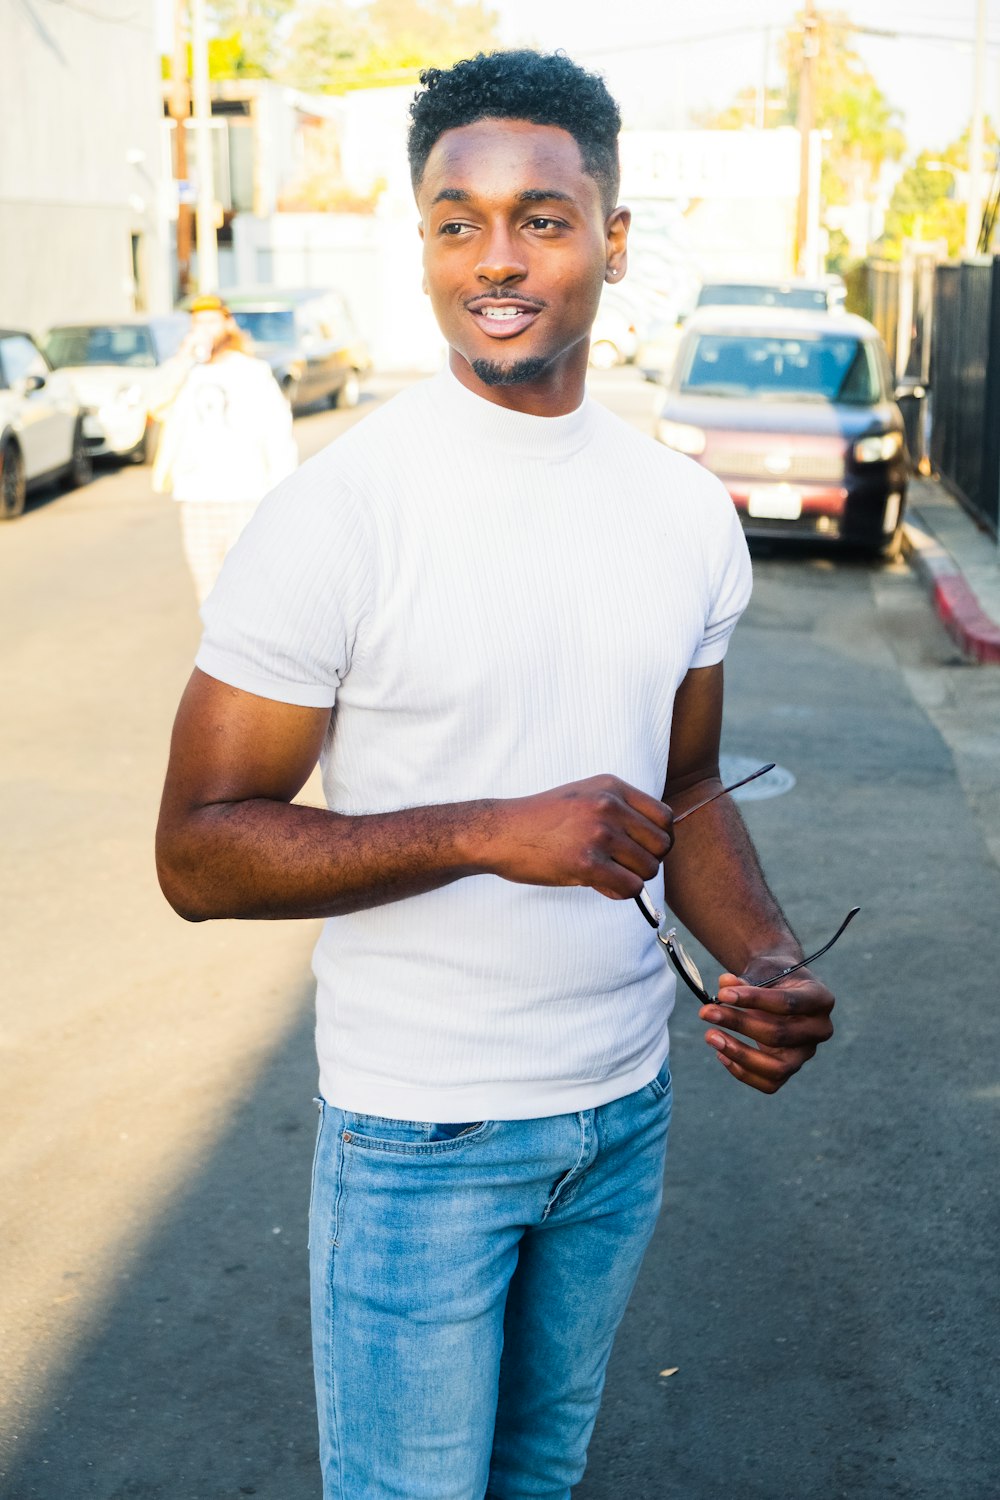 Man in white crew neck t-shirt and blue denim jeans standing on sidewalk  during daytime photo – Free Venice beach Image on Unsplash